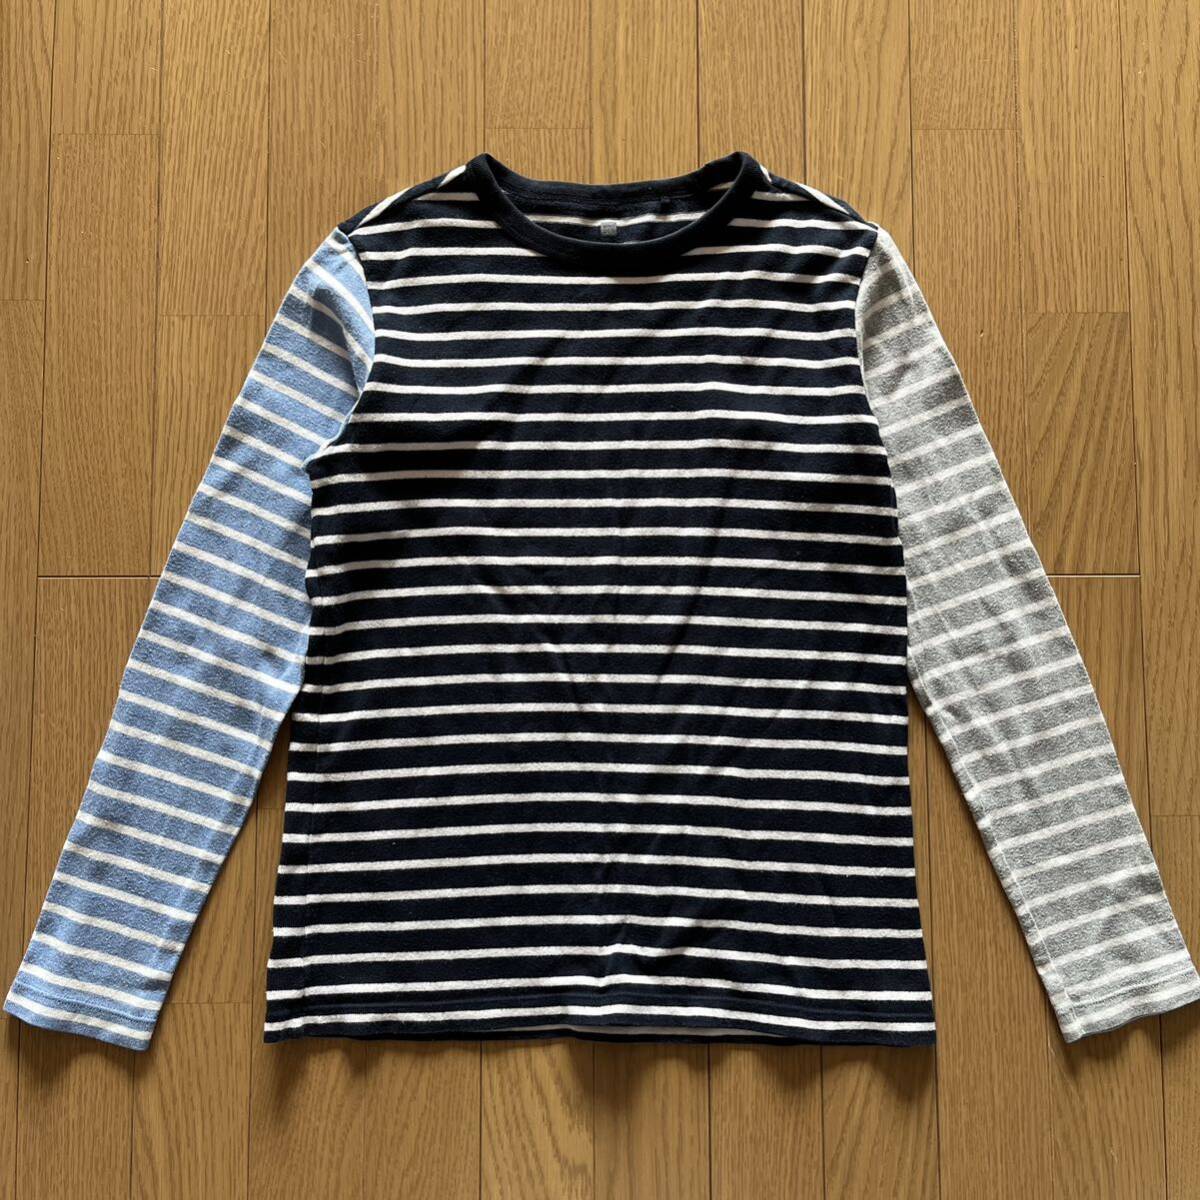  Uniqlo tops 150 cut and sewn border navy blue color light blue grey long sleeve cut and sewn 